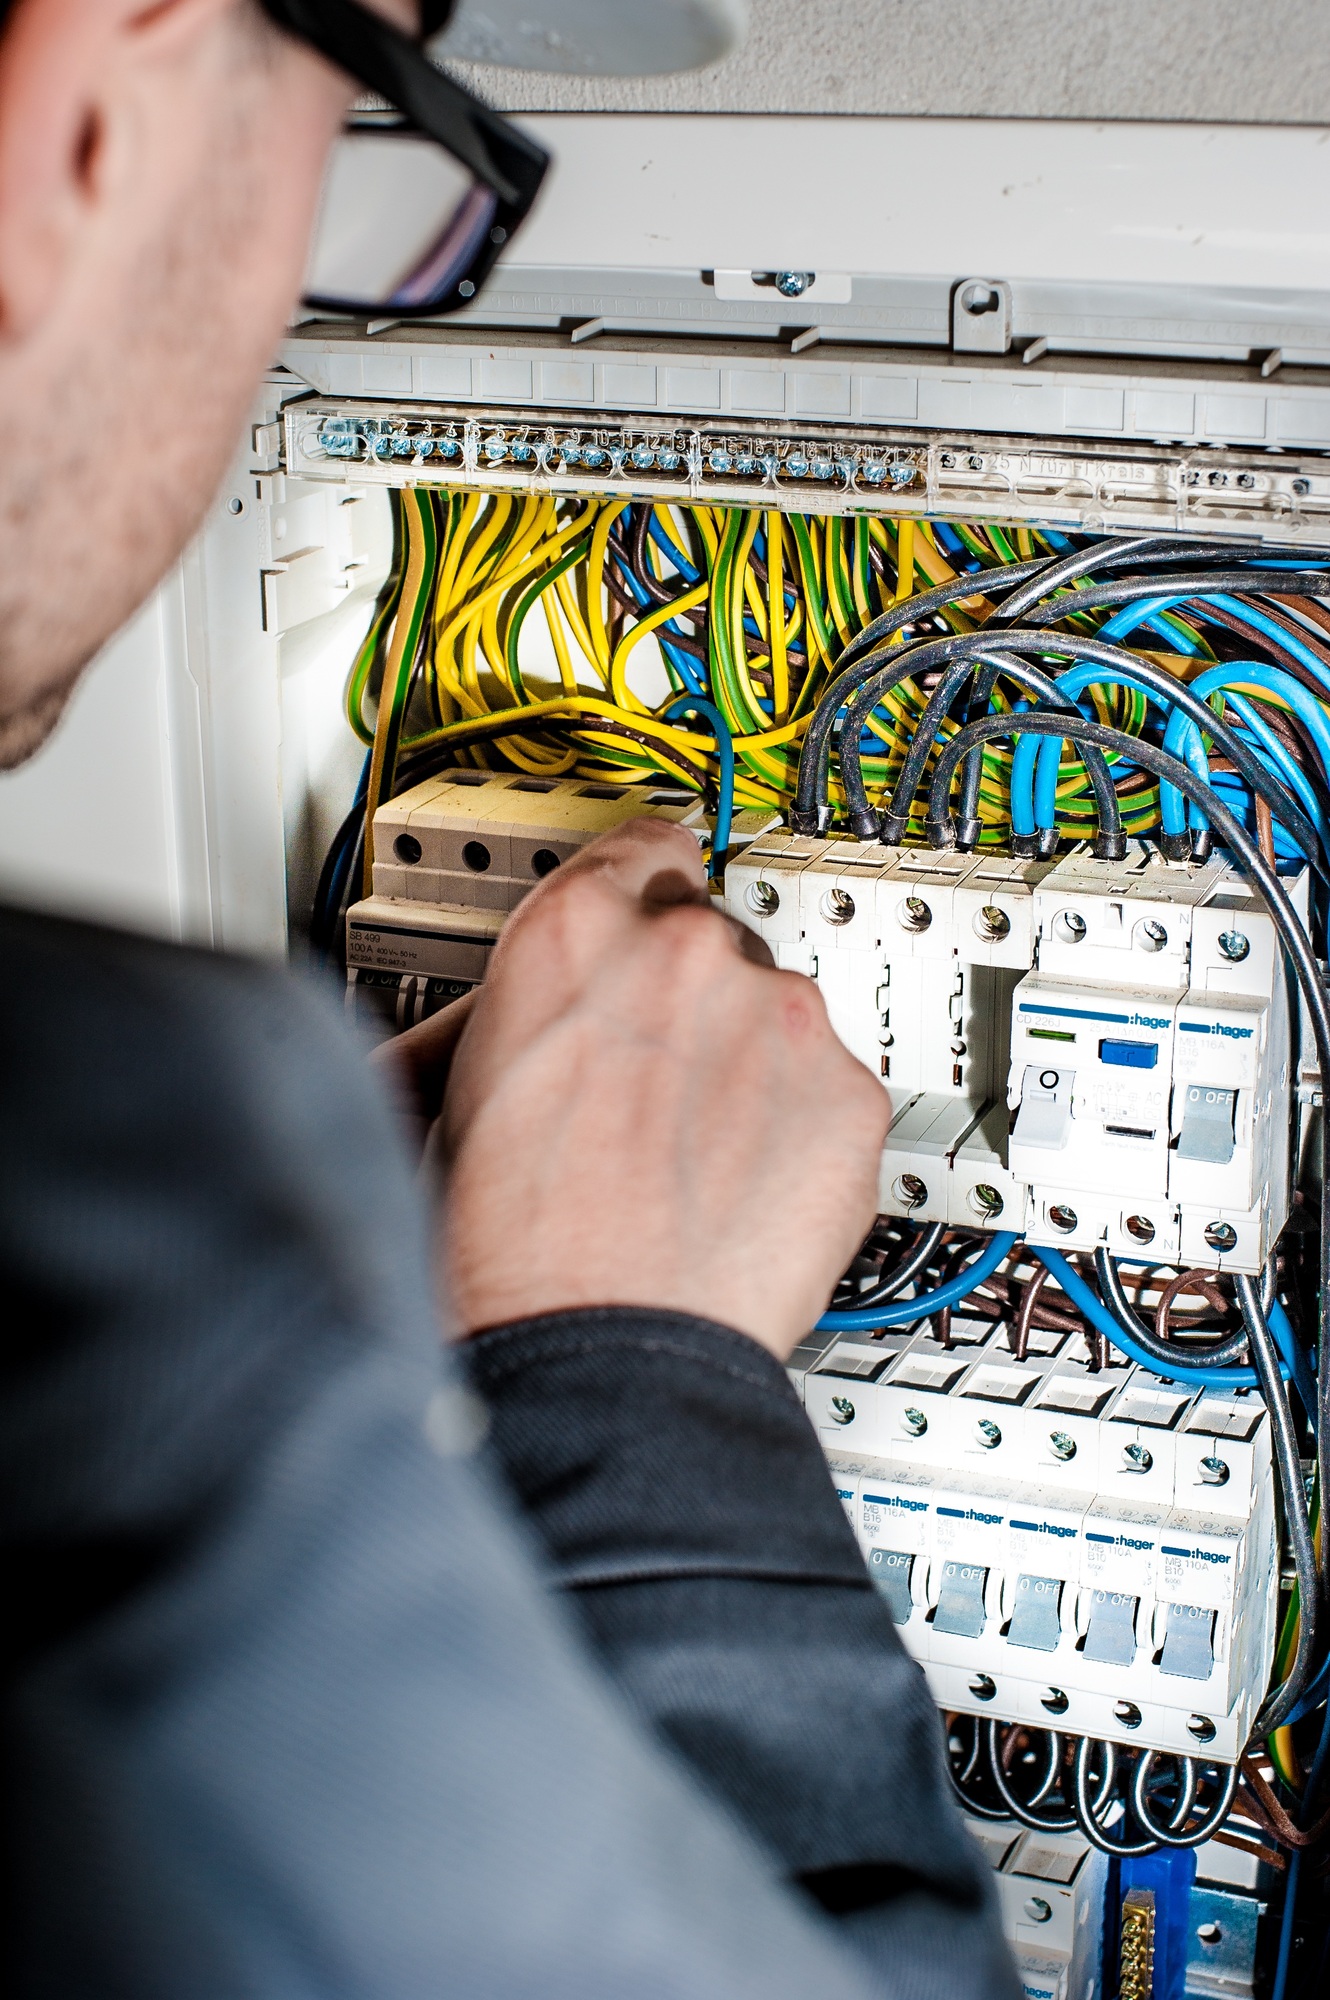 Are you wondering how to know you've found a reliable electrician? Click here for five important questions you should ask before hiring an electrician.